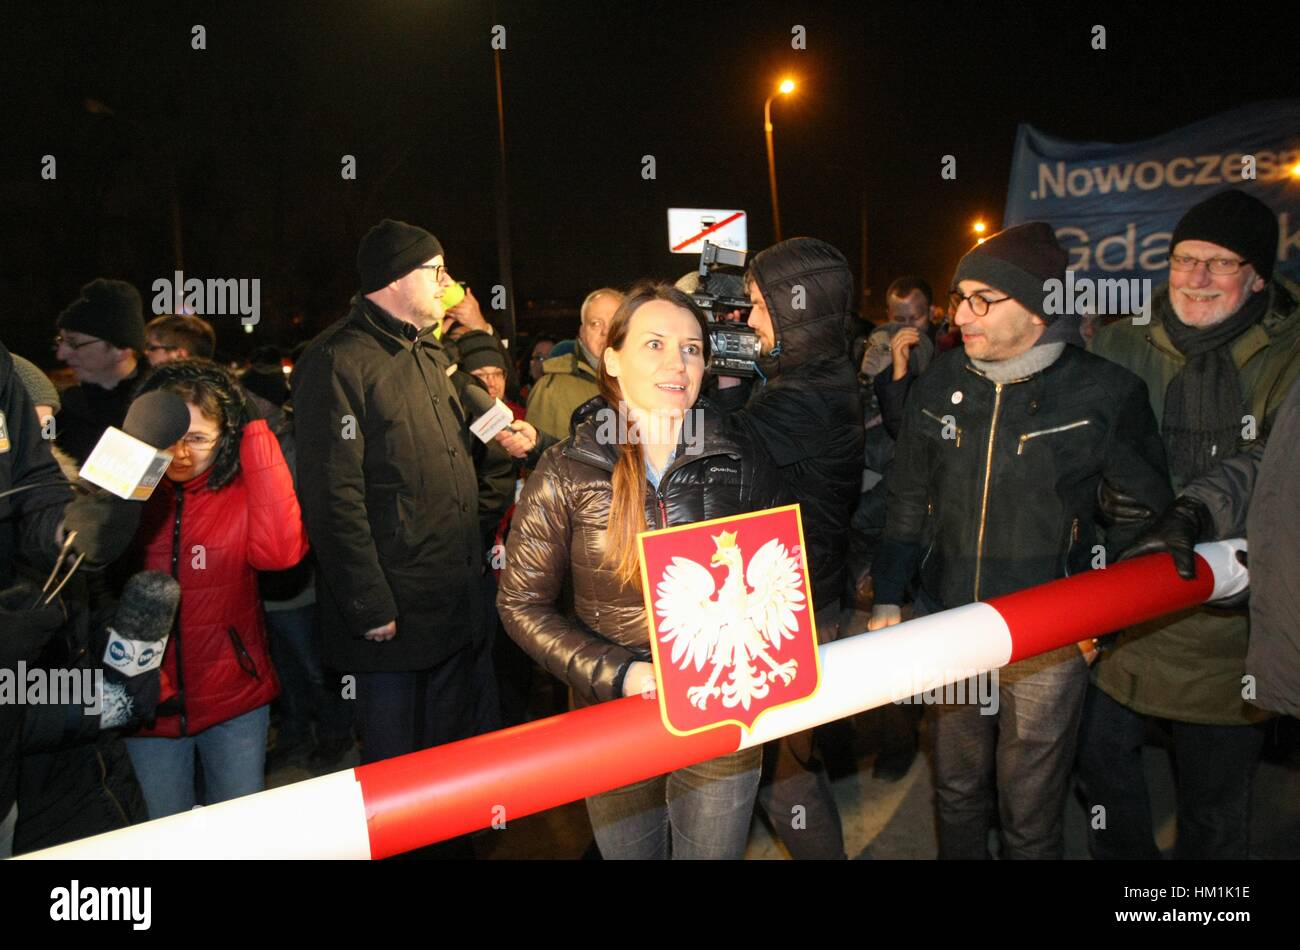 Gdansk, Poland. 31st Jan, 2017. Agnieszka Pomaska (C) Polish parliament member holding symbolic border barrier is seen outside the Second World War Museum on 31 January 2017 in Gdansk, Poland. Protest was organized by KOD movement against Poland's nationalist government plans to reshape the Museum's permanent exhibition into a display more focused on Poland's experience of the conflict. Museum is expected to open to the public on February 2017, is to place the war in broader international context. Credit: Michal Fludra/Alamy Live News Stock Photo